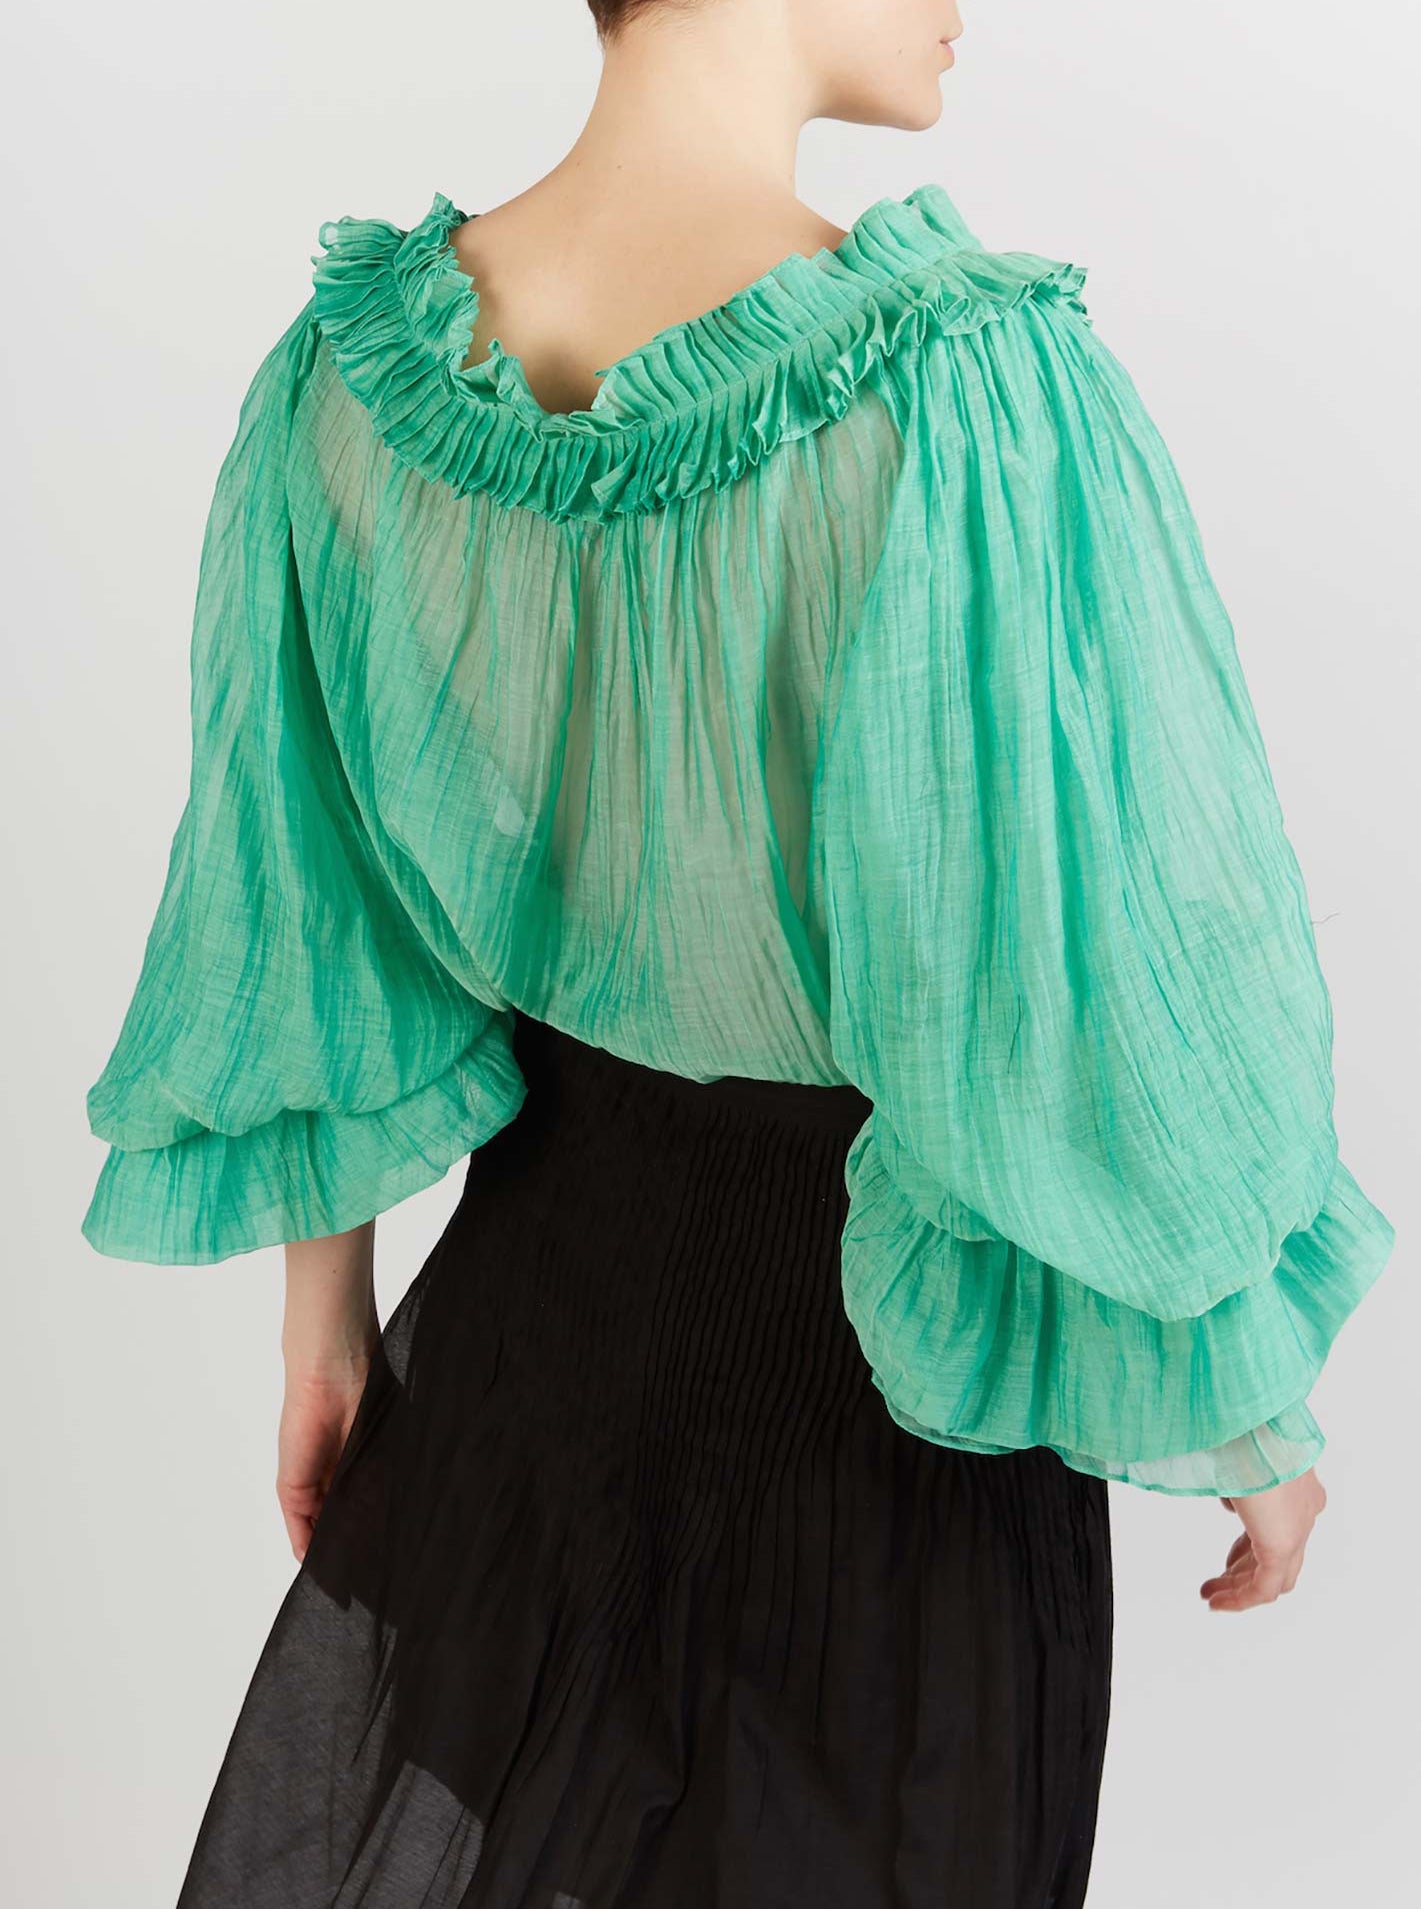 Back view of Roussia Veridian Green Blouse by Thierry Colson photographed by Stéphane Gautronneau